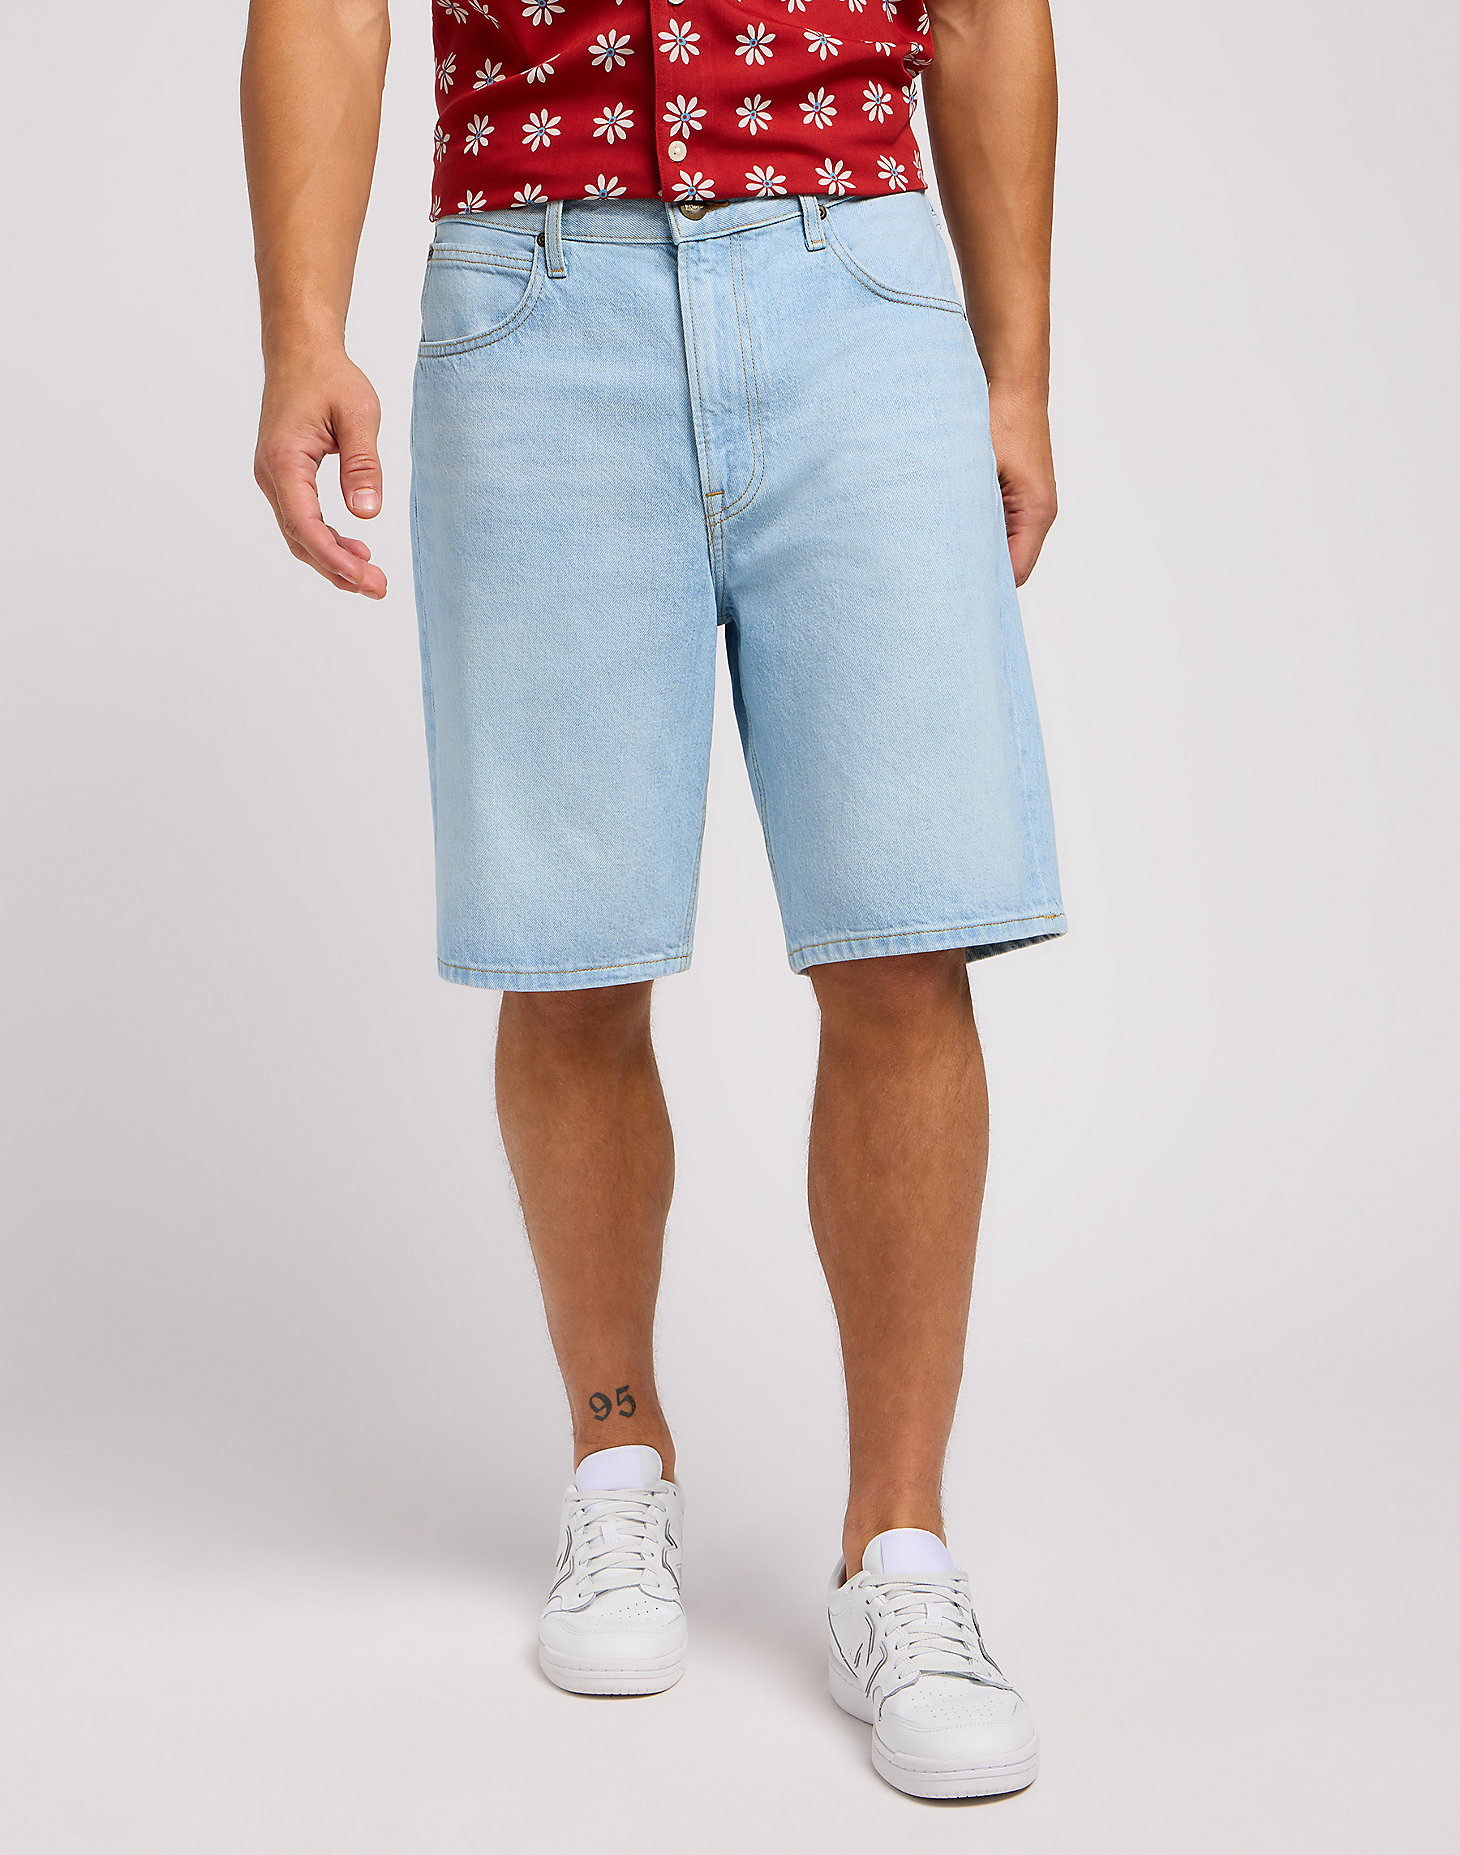 Asher Short in Light Stone Wash main view